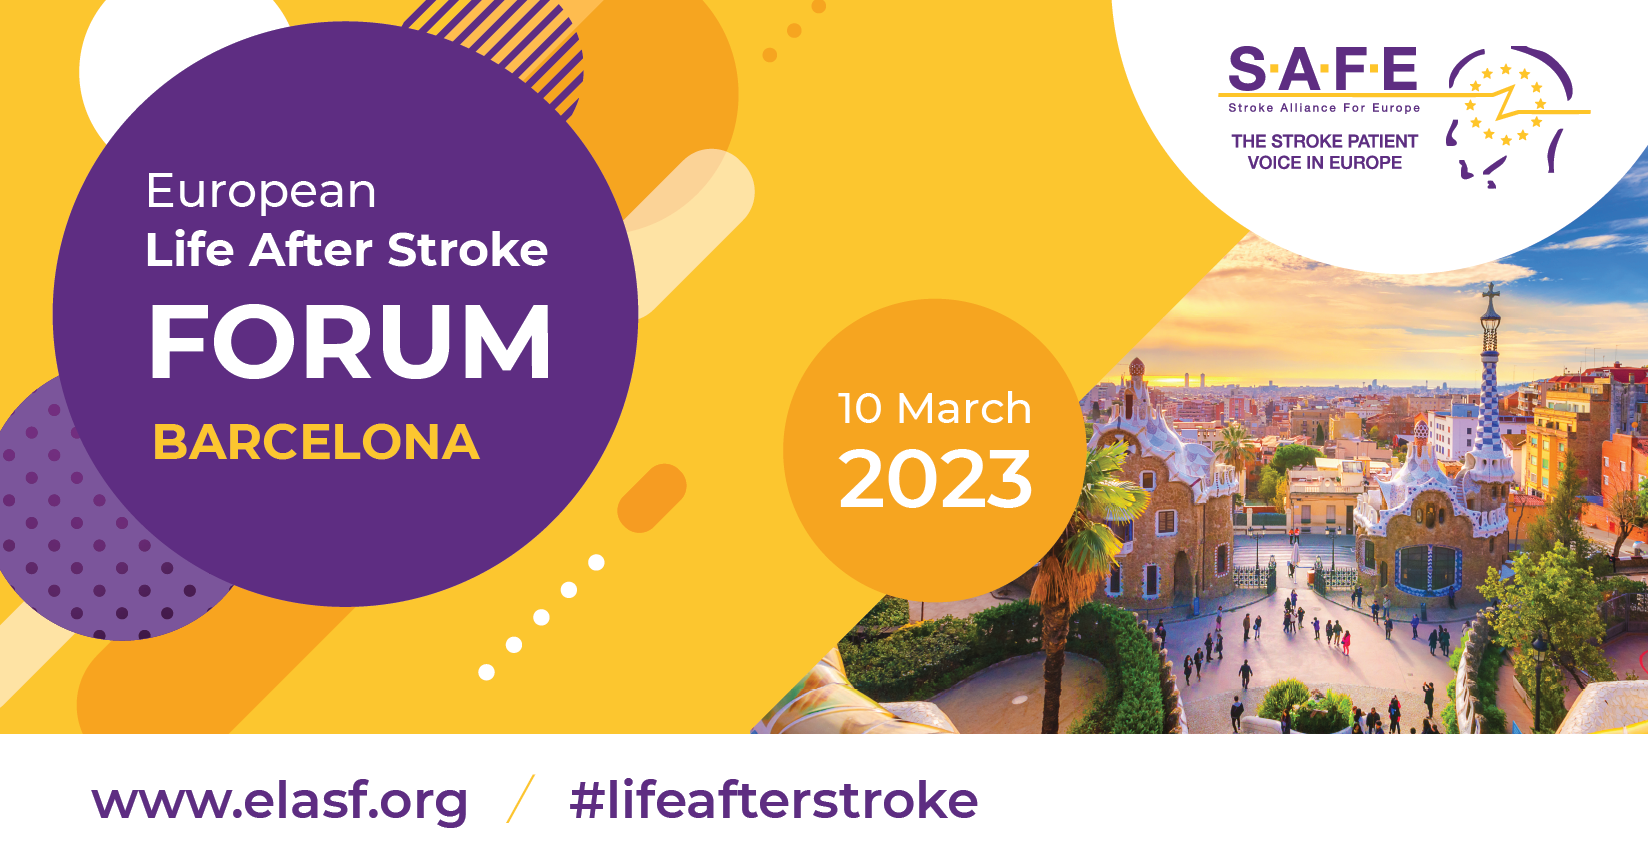 Full programme for the European Life After Stroke Forum confirmed